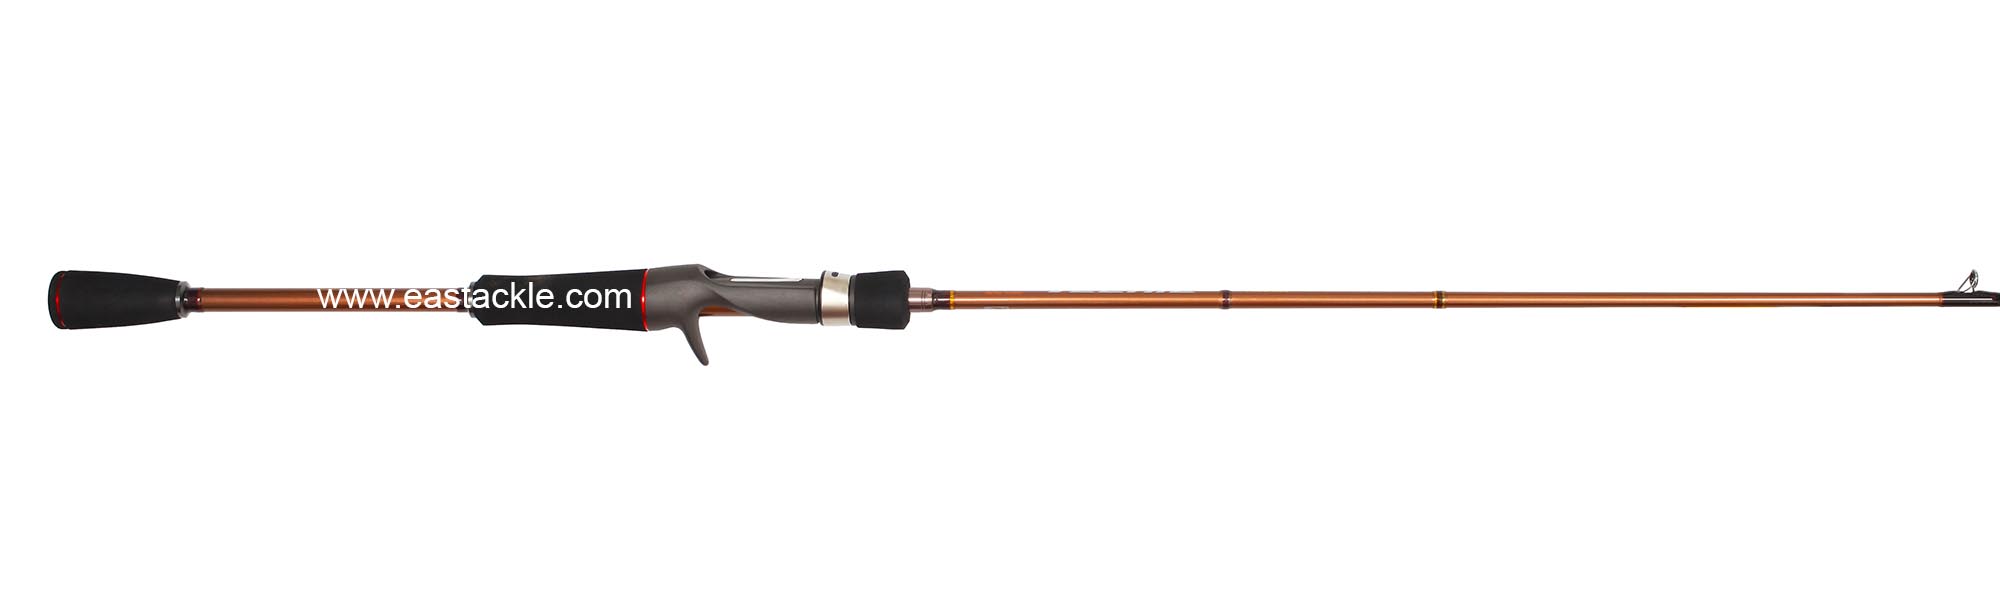 Storm - Teenie - TNC642UL - Bait Casting Rod - Butt to Stripper Guide (Side View) | Eastackle